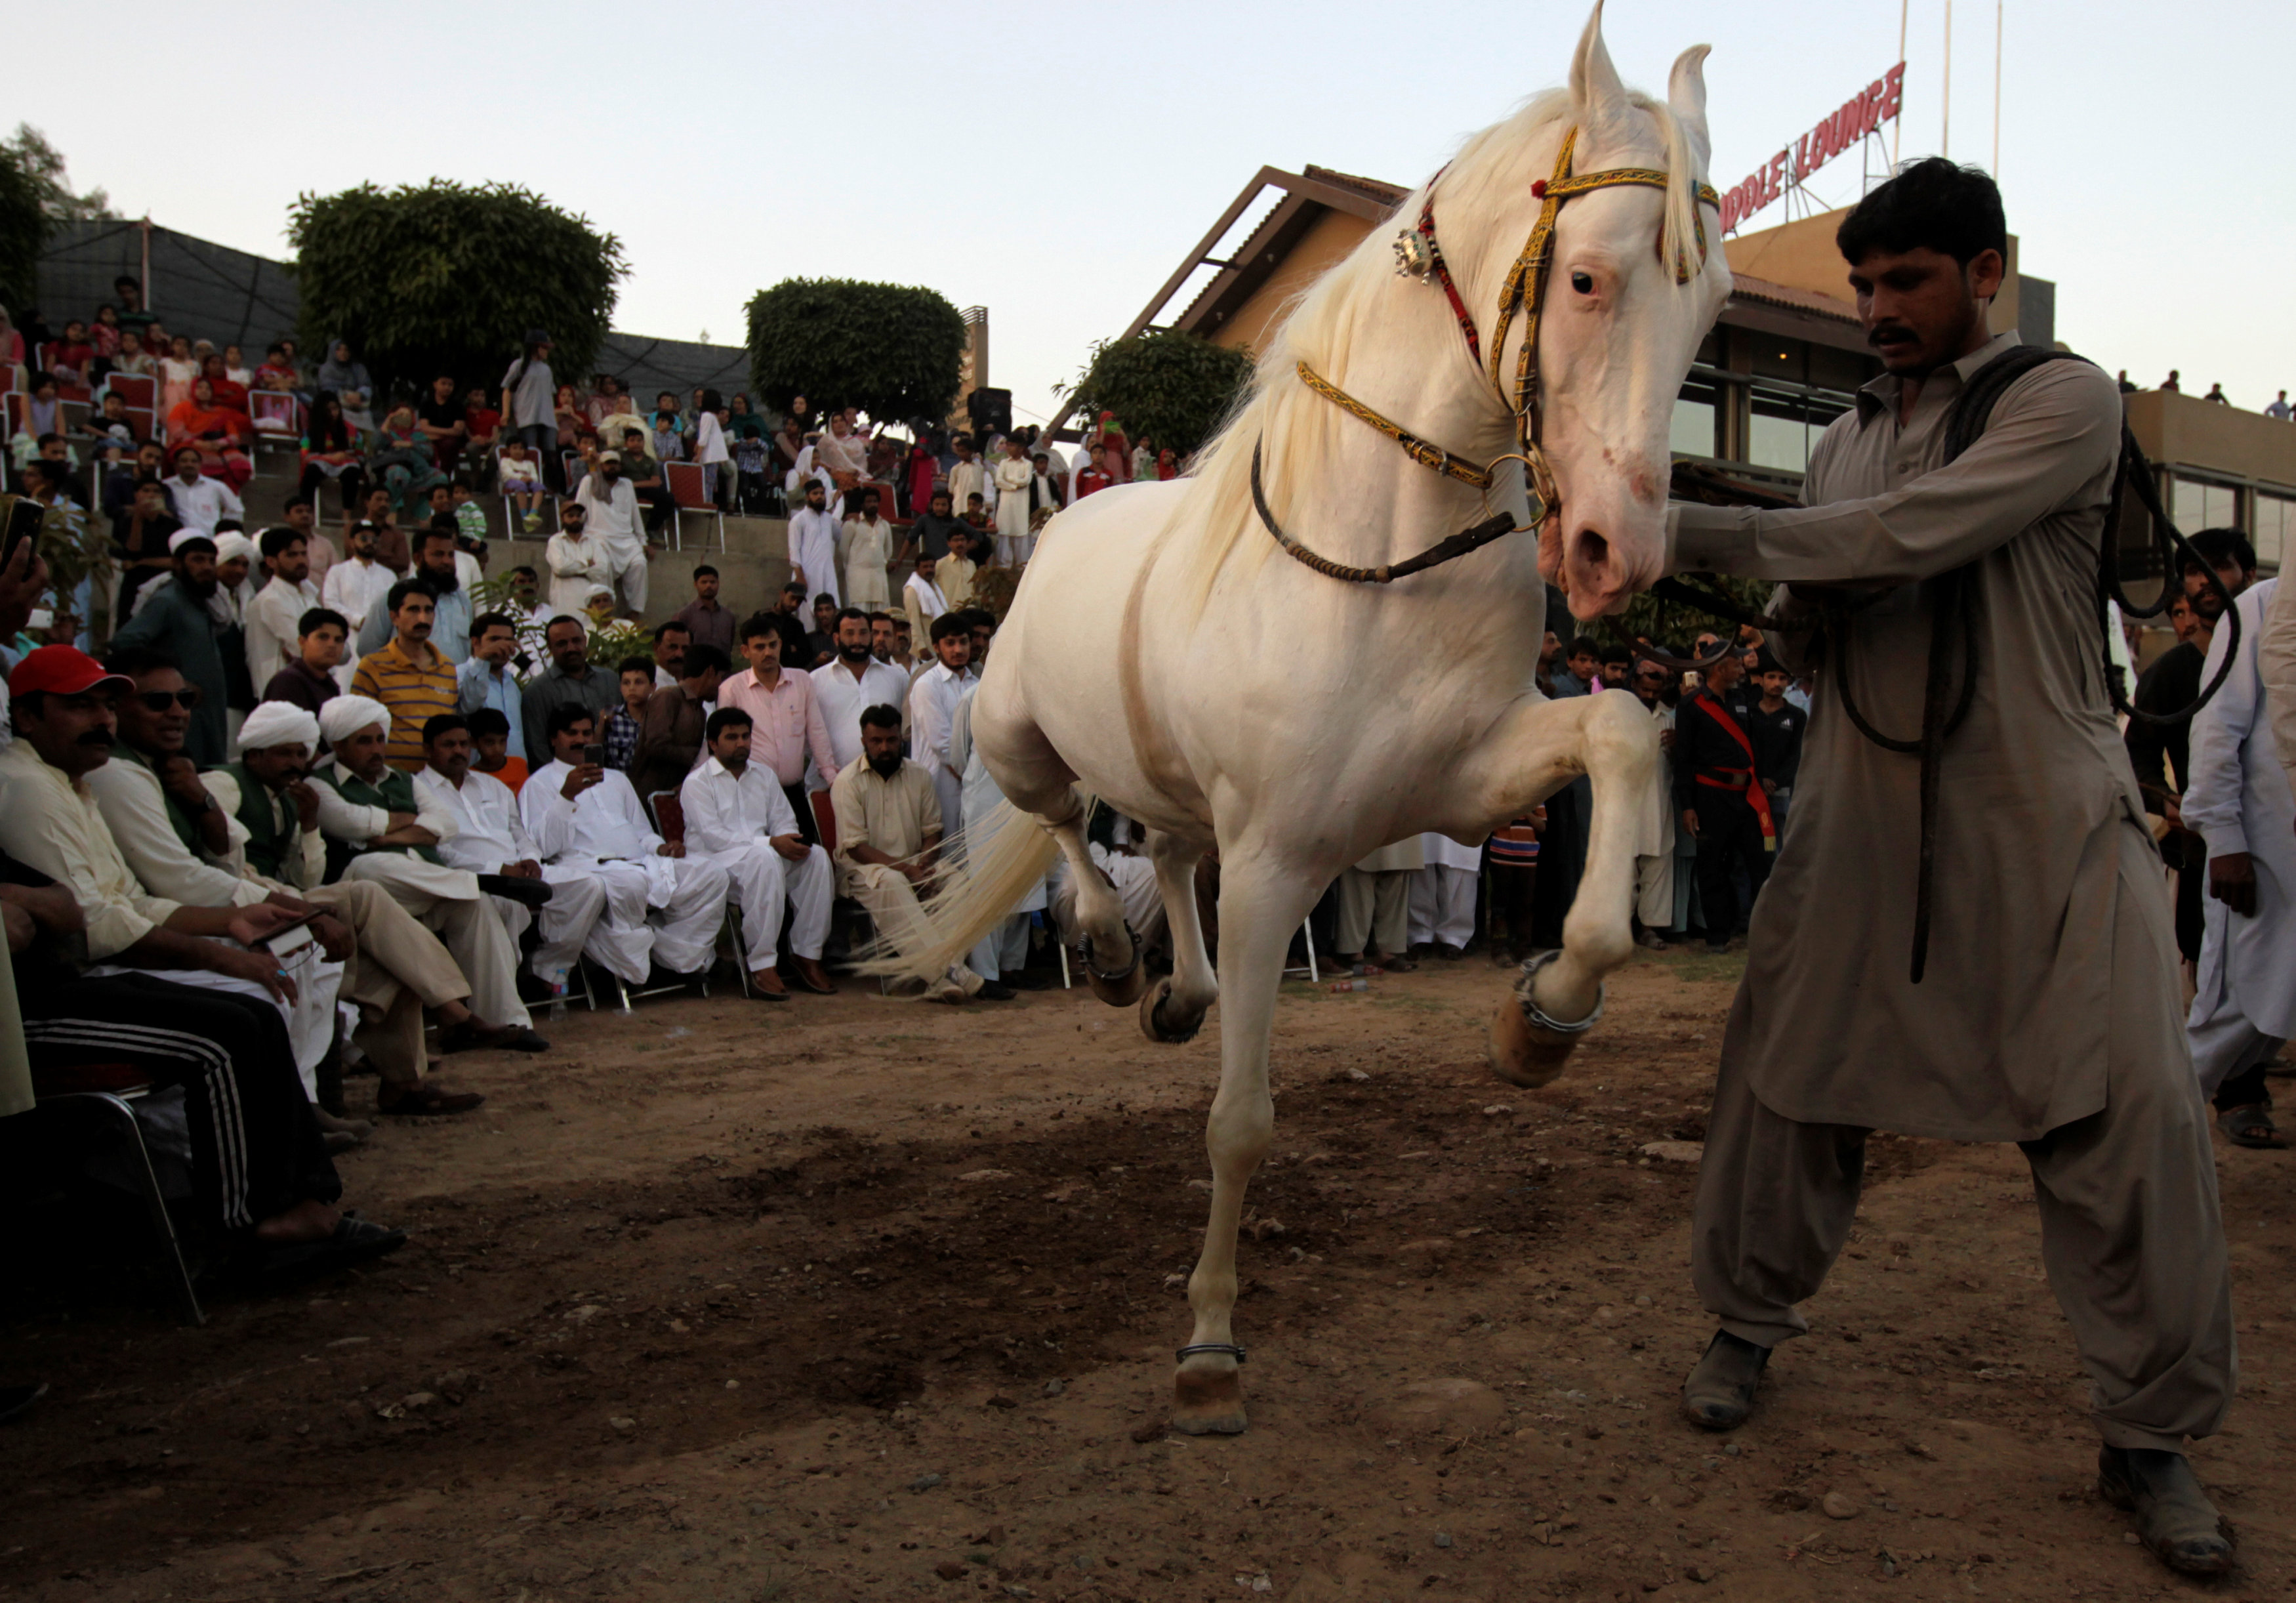 Spectators watch a dancing horse perform at a show in Bharia Town, Pakistan. PHOTO: REUTERS